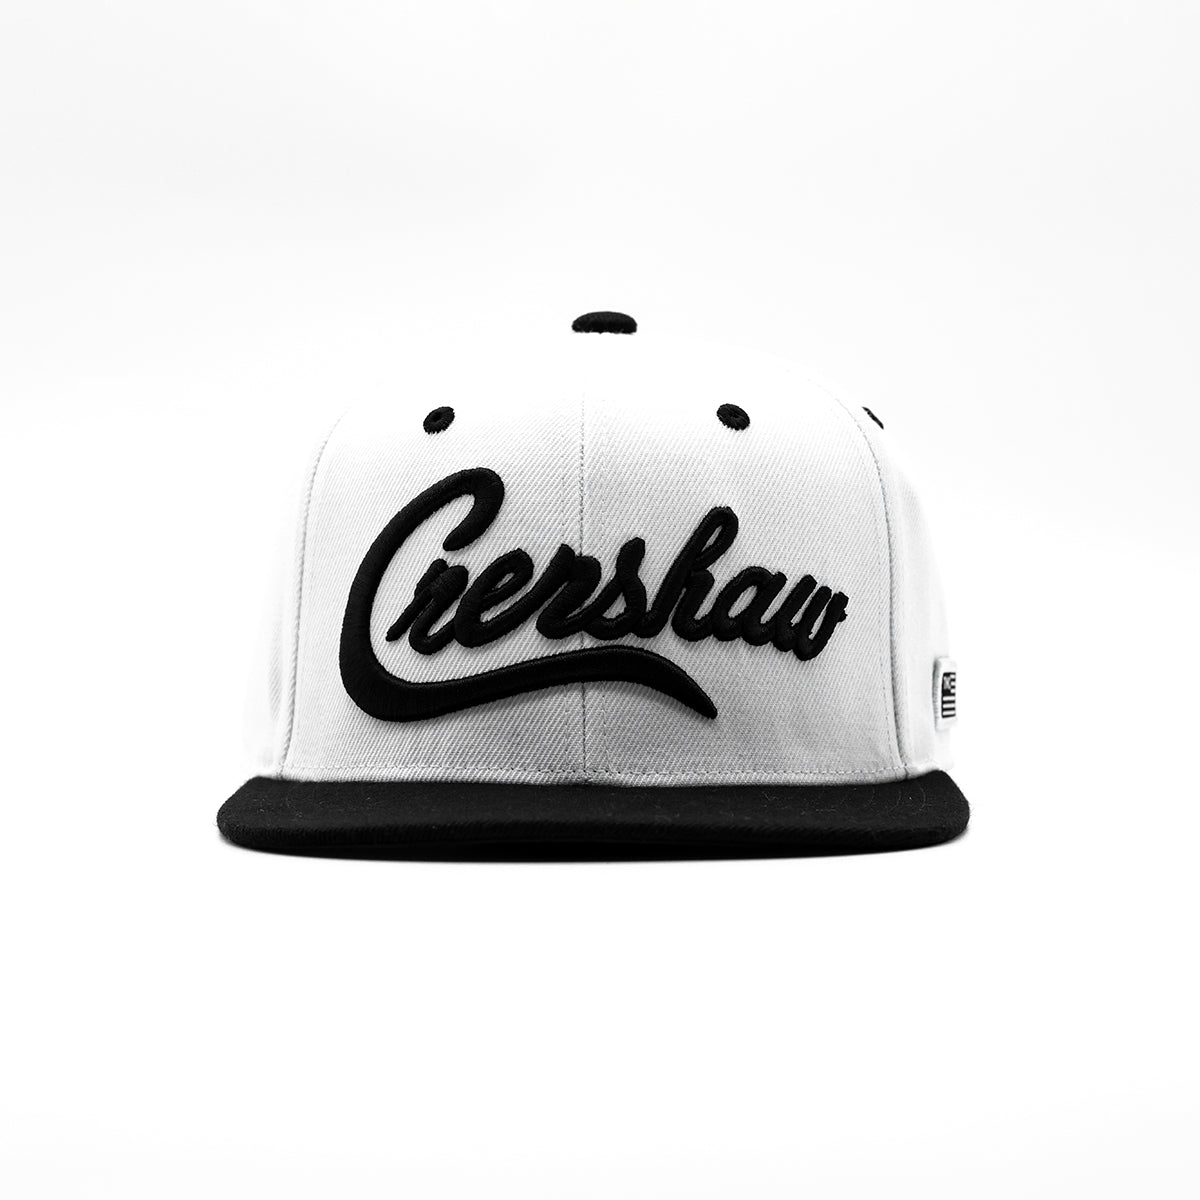 Crenshaw Limited Edition Snapback - White/Black [Two-Tone] - Front